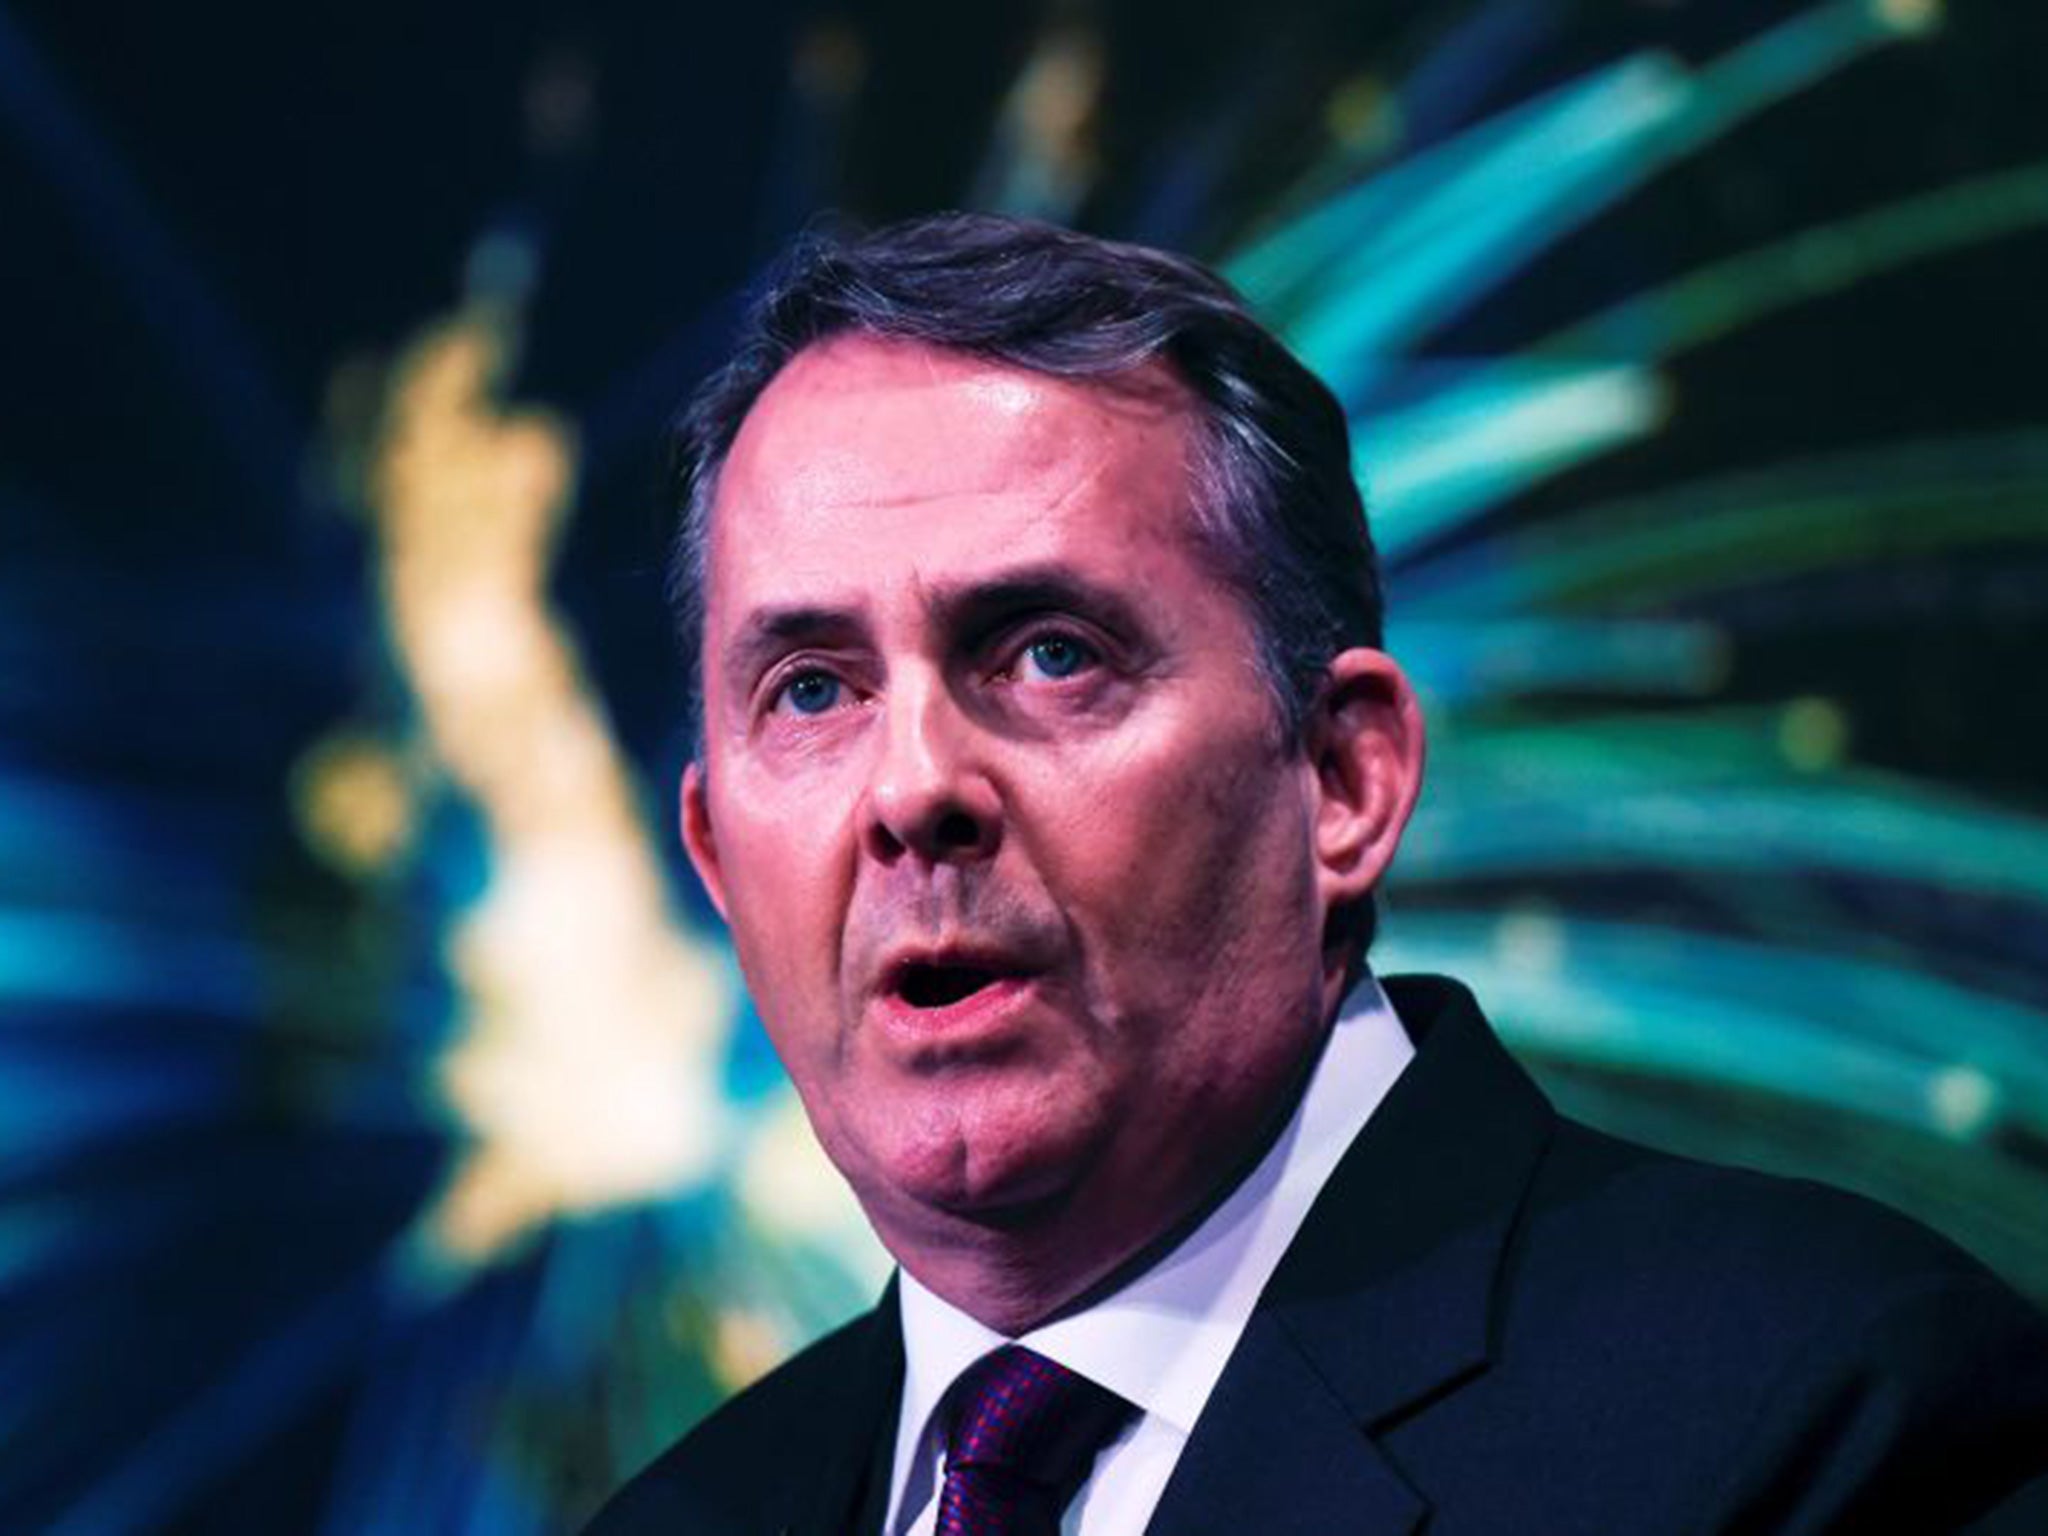 Liam Fox visited Mexico to drum up trade for Brexit Britain in July 2017